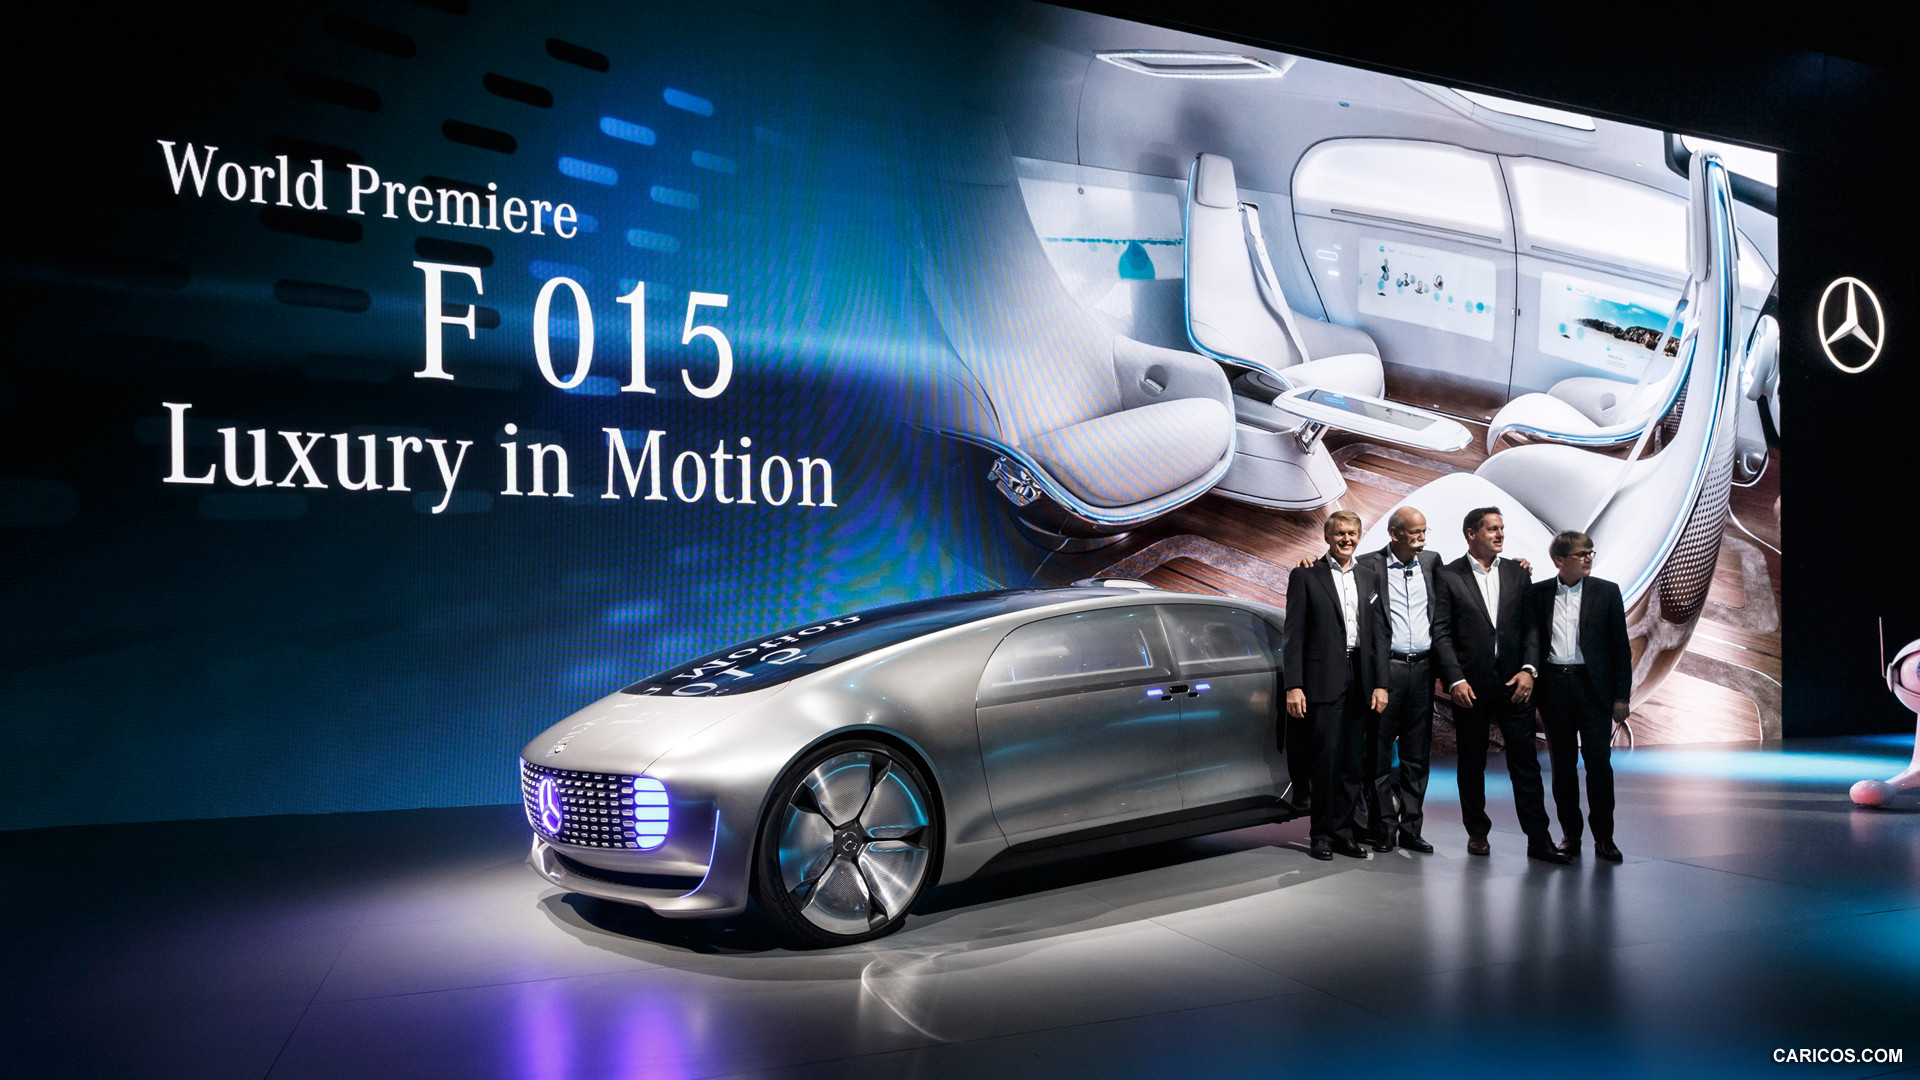 2015 Mercedes-Benz F 015 Luxury in Motion Concept at CES - Side, #91 of 92